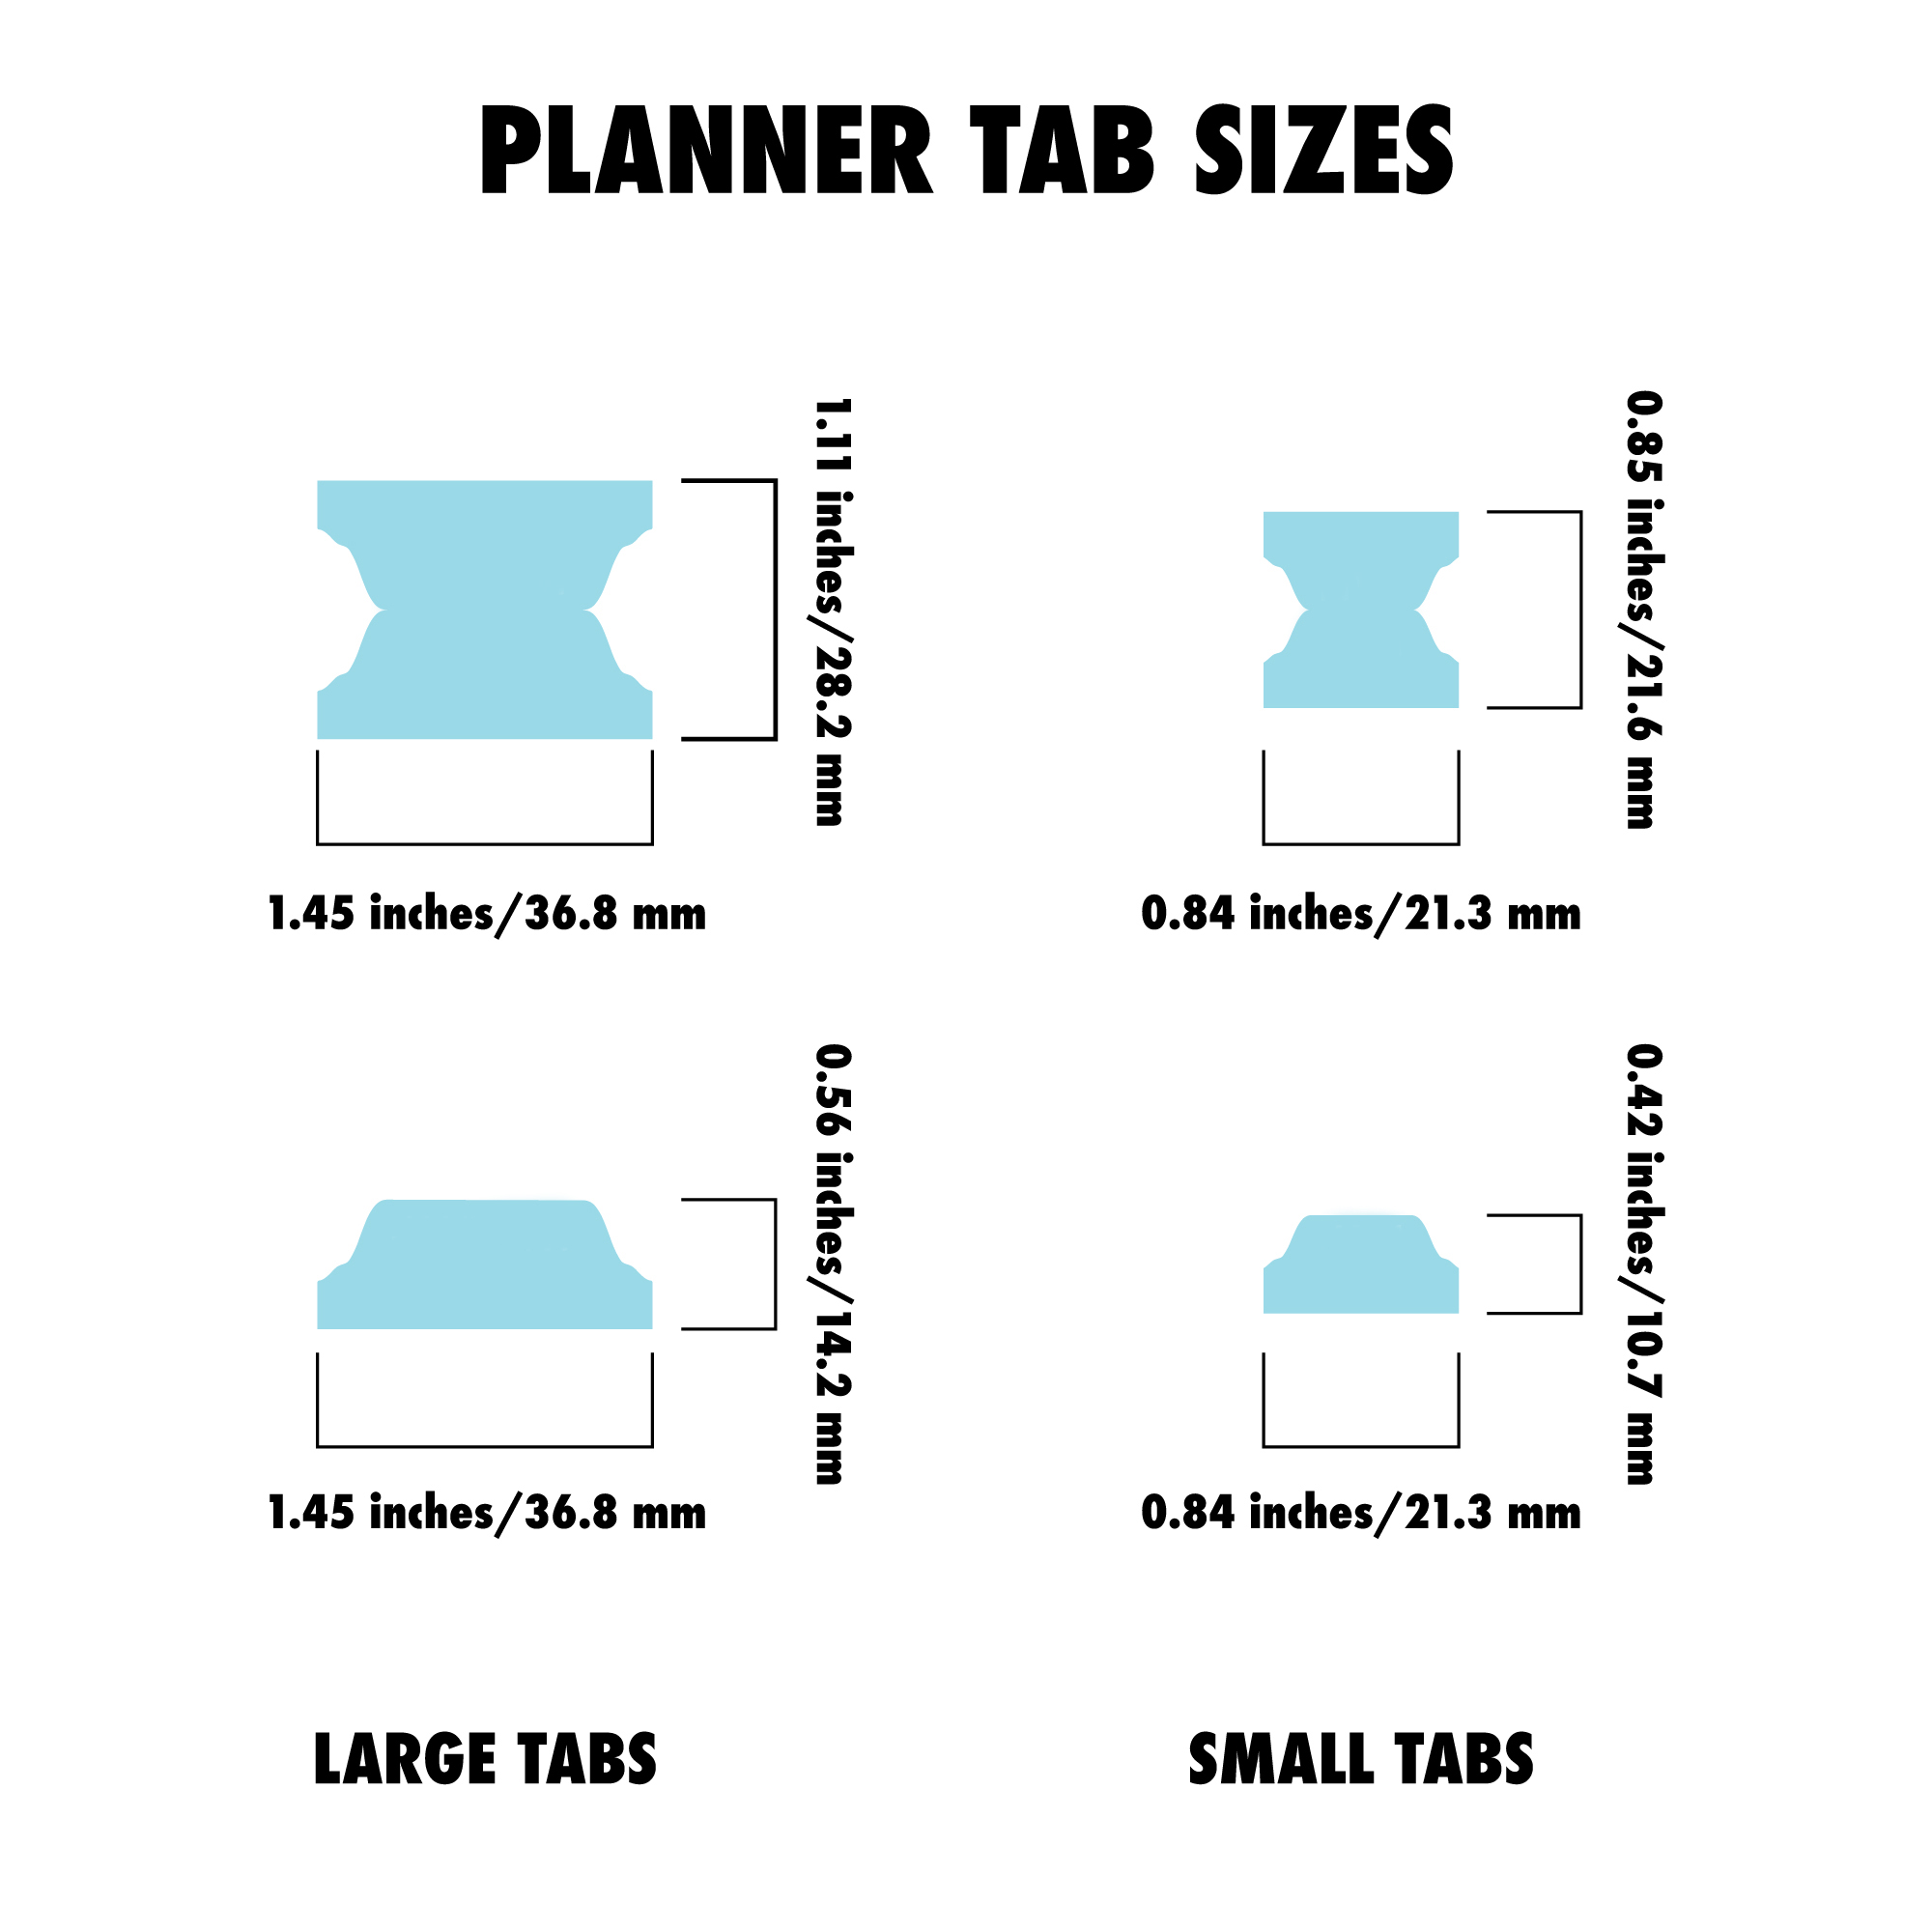 Smal and Large planner tabs dimensions